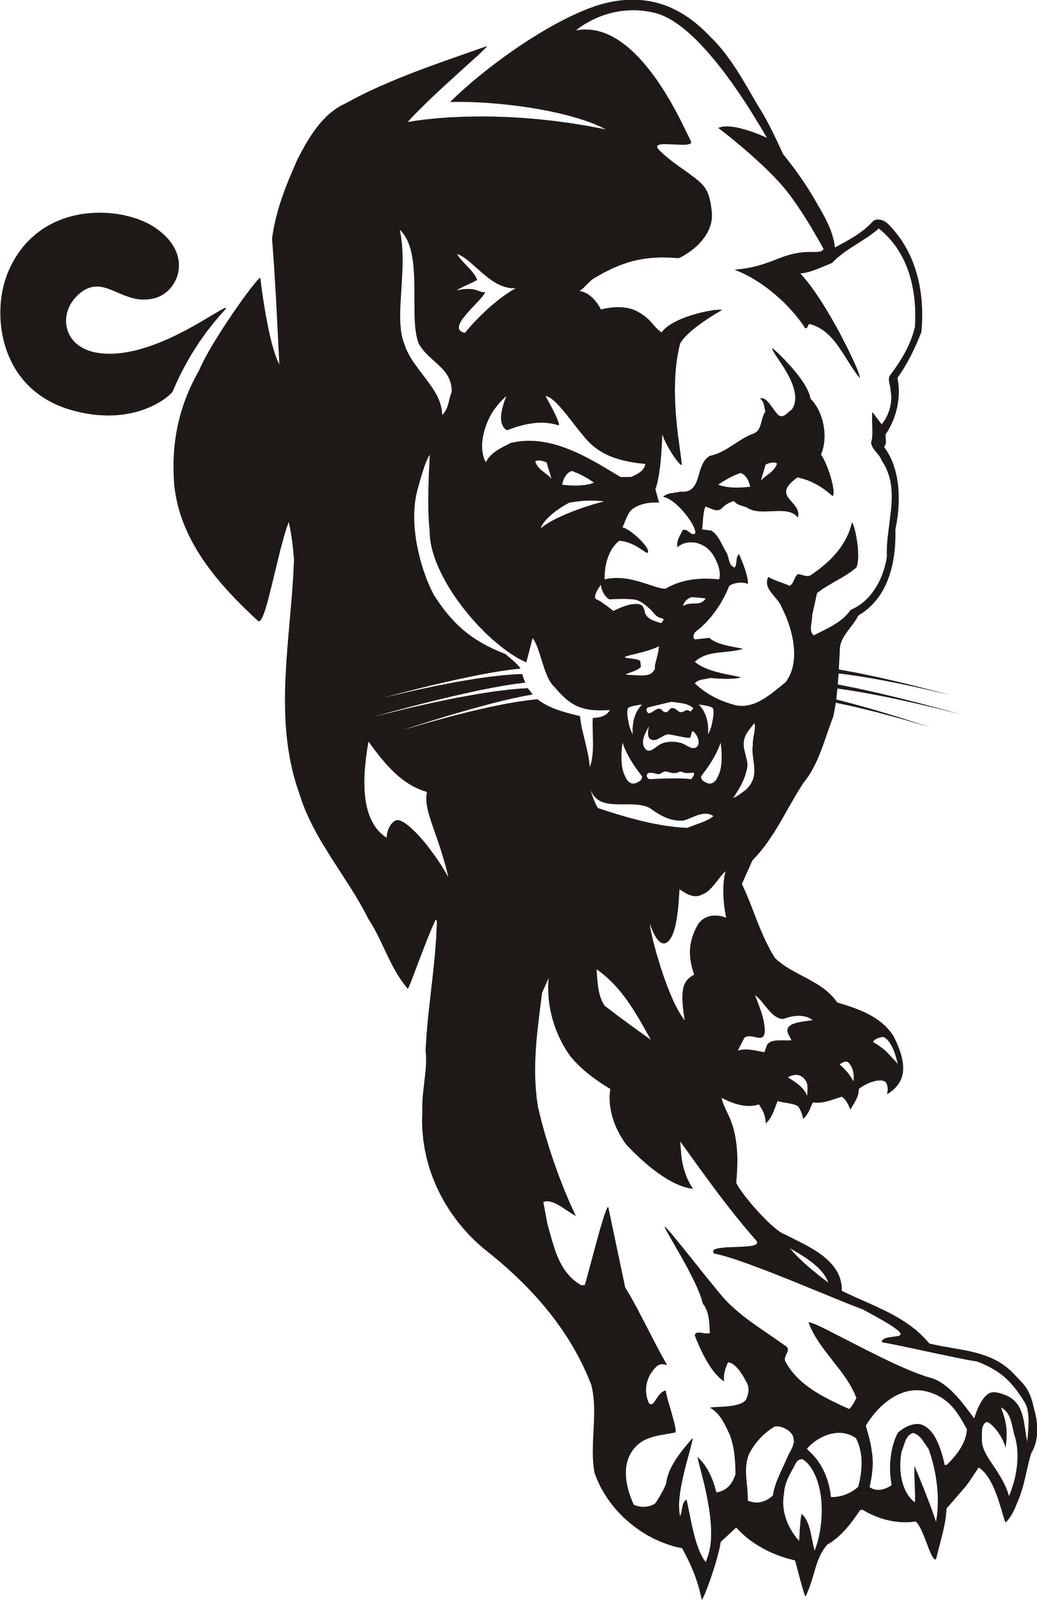 panther clipart free vector - photo #7